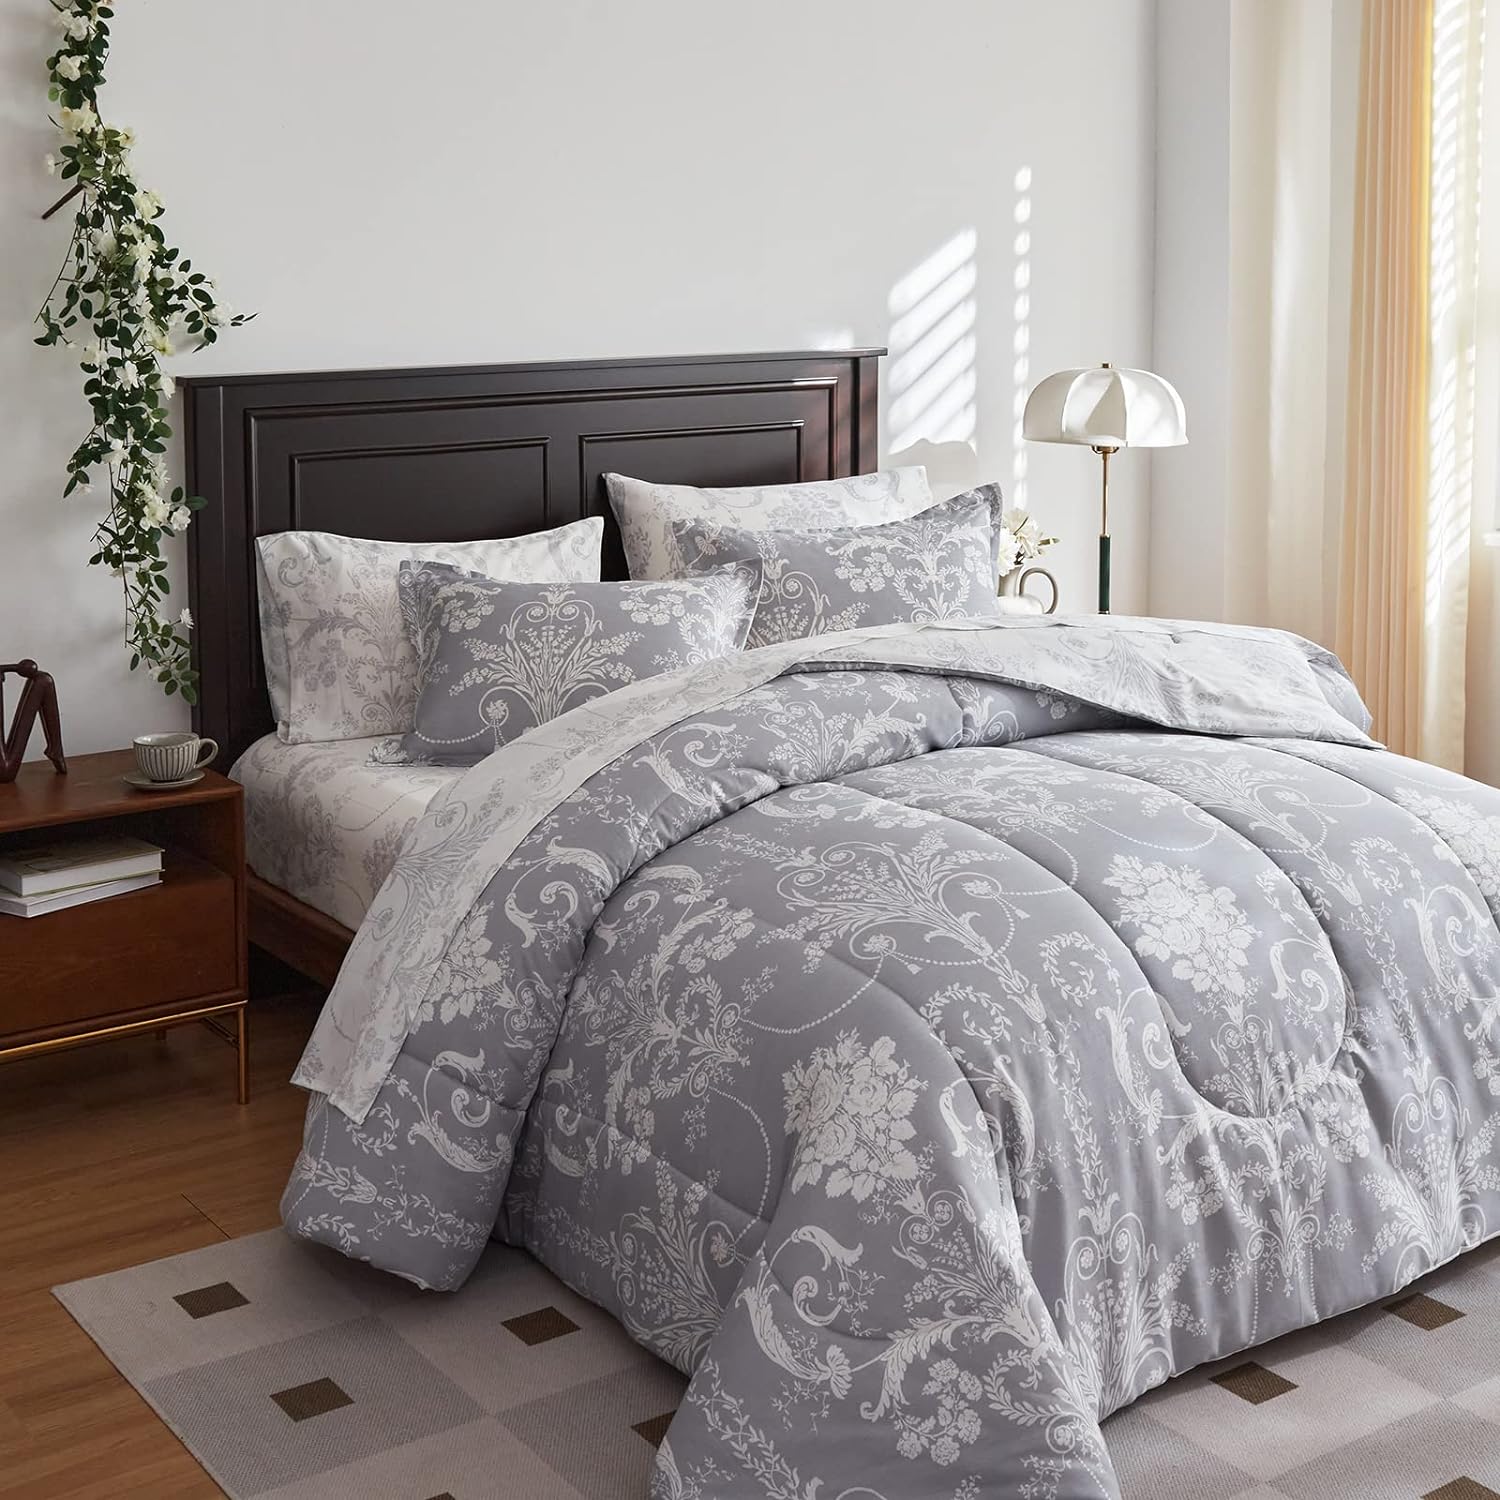 Great Choice Products Gray Cotton Bed In A Bag 7 Pieces Queen Size Floral Comforter Sheet Set White Flowers Leaves Bedding Set (1 Comforter 2 …